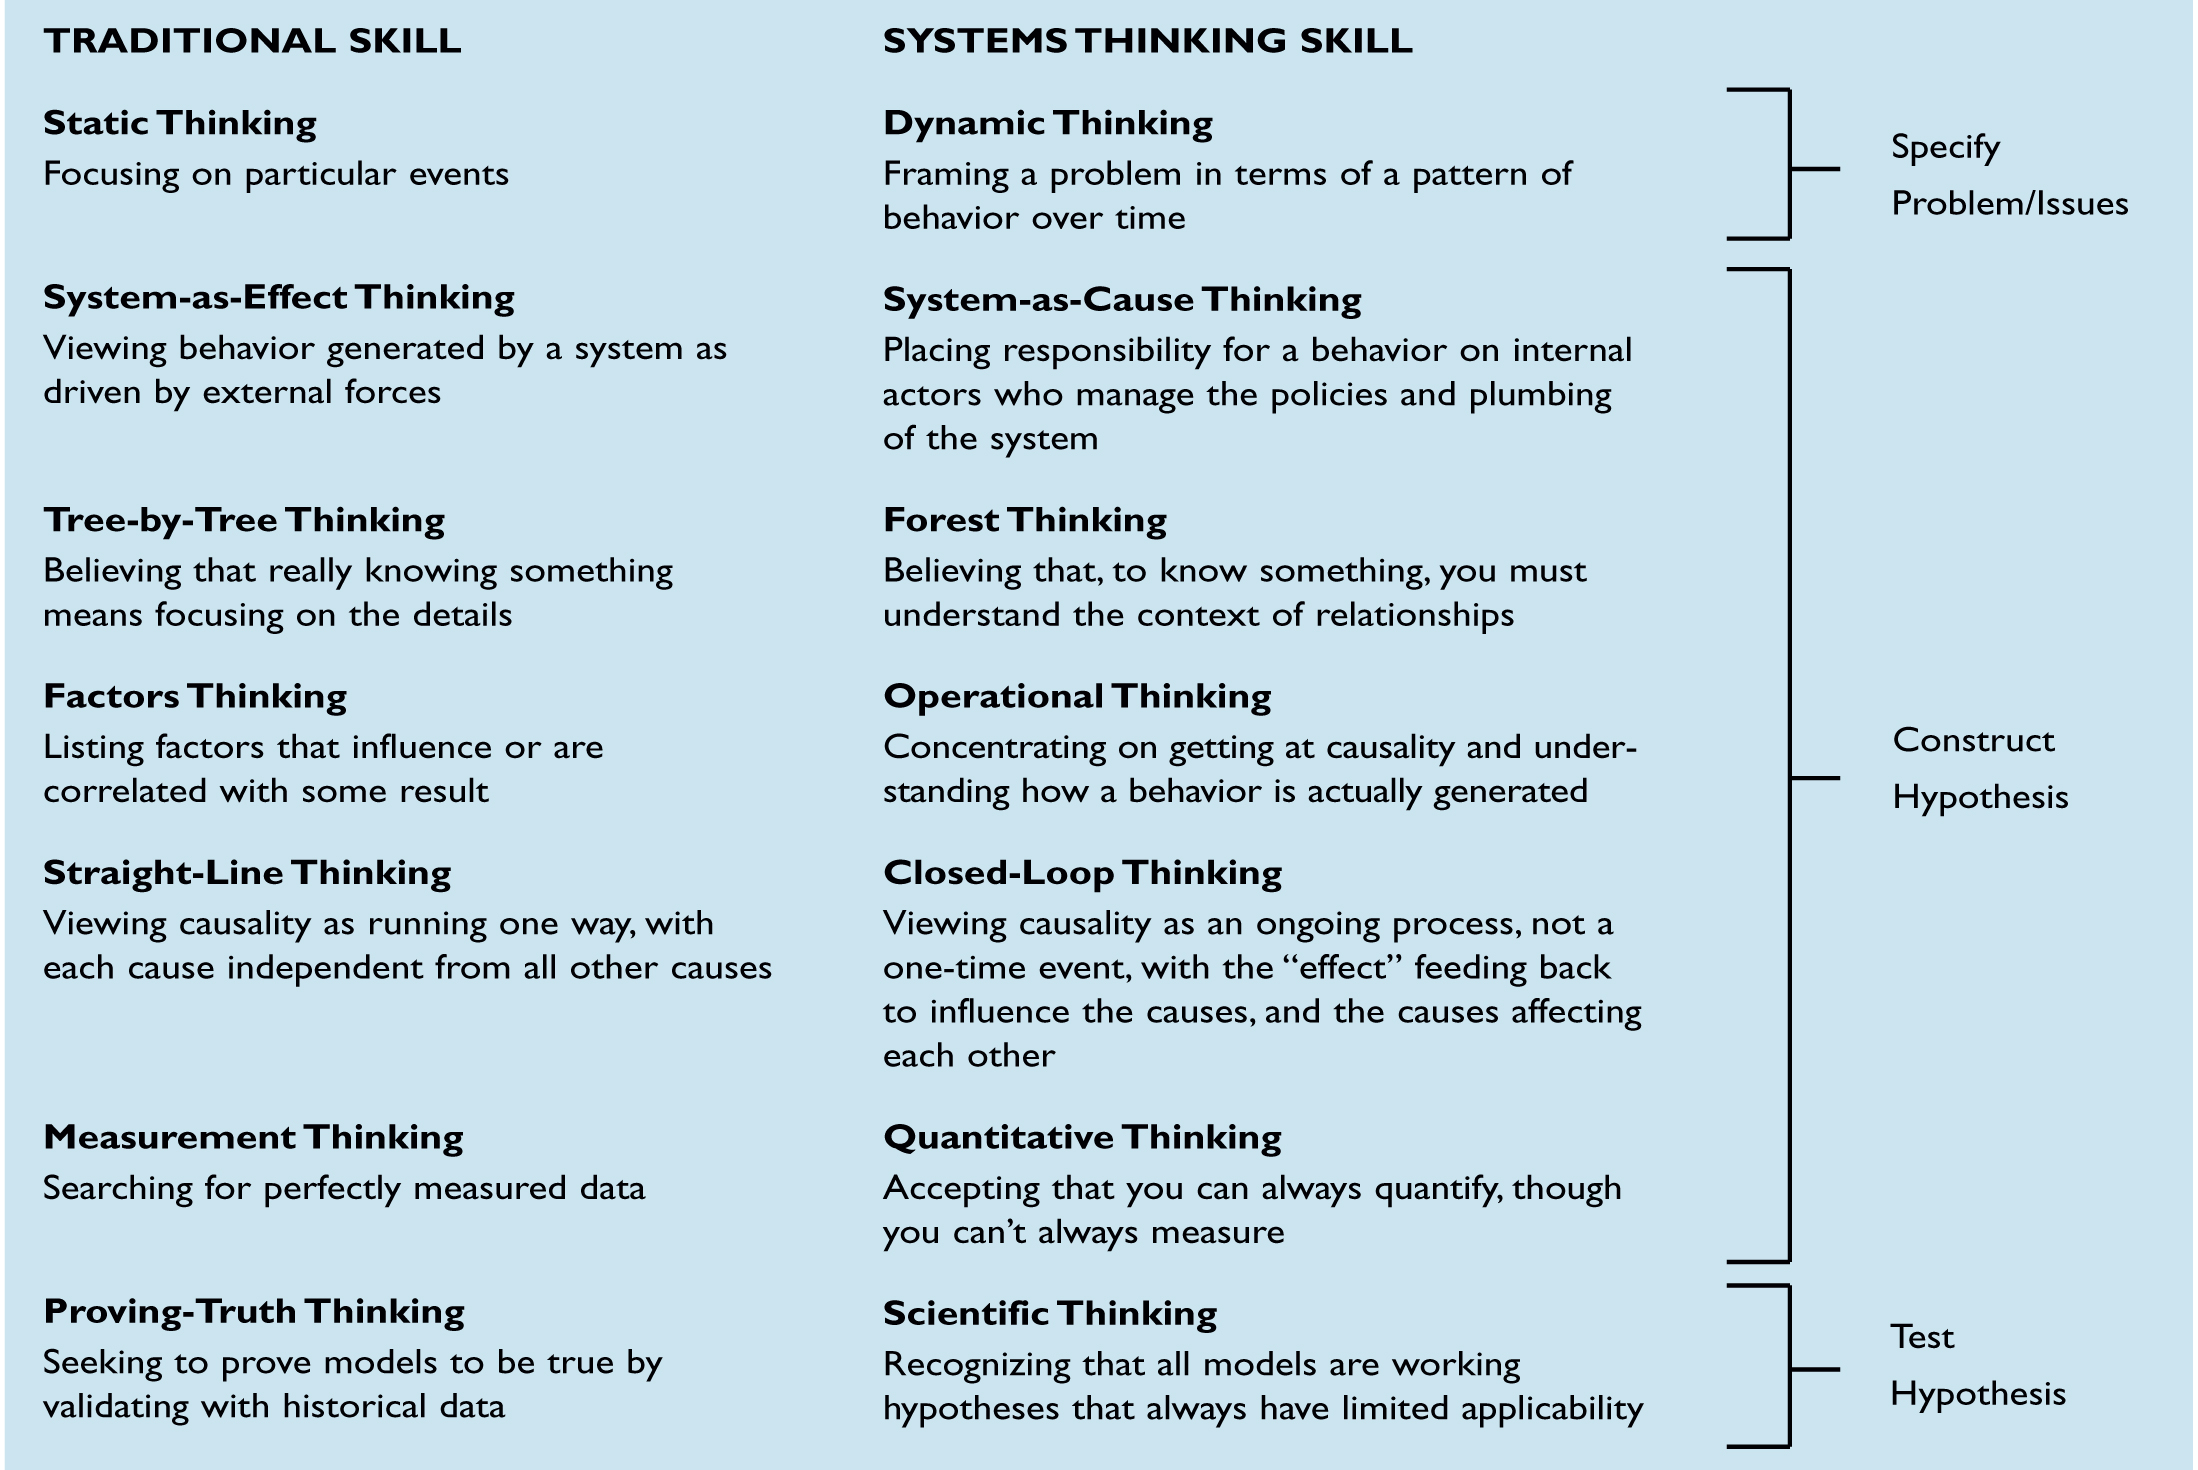 TRADITIONAL BUSINESS THINKING VS. SYSTEMS THINKING SKILLS